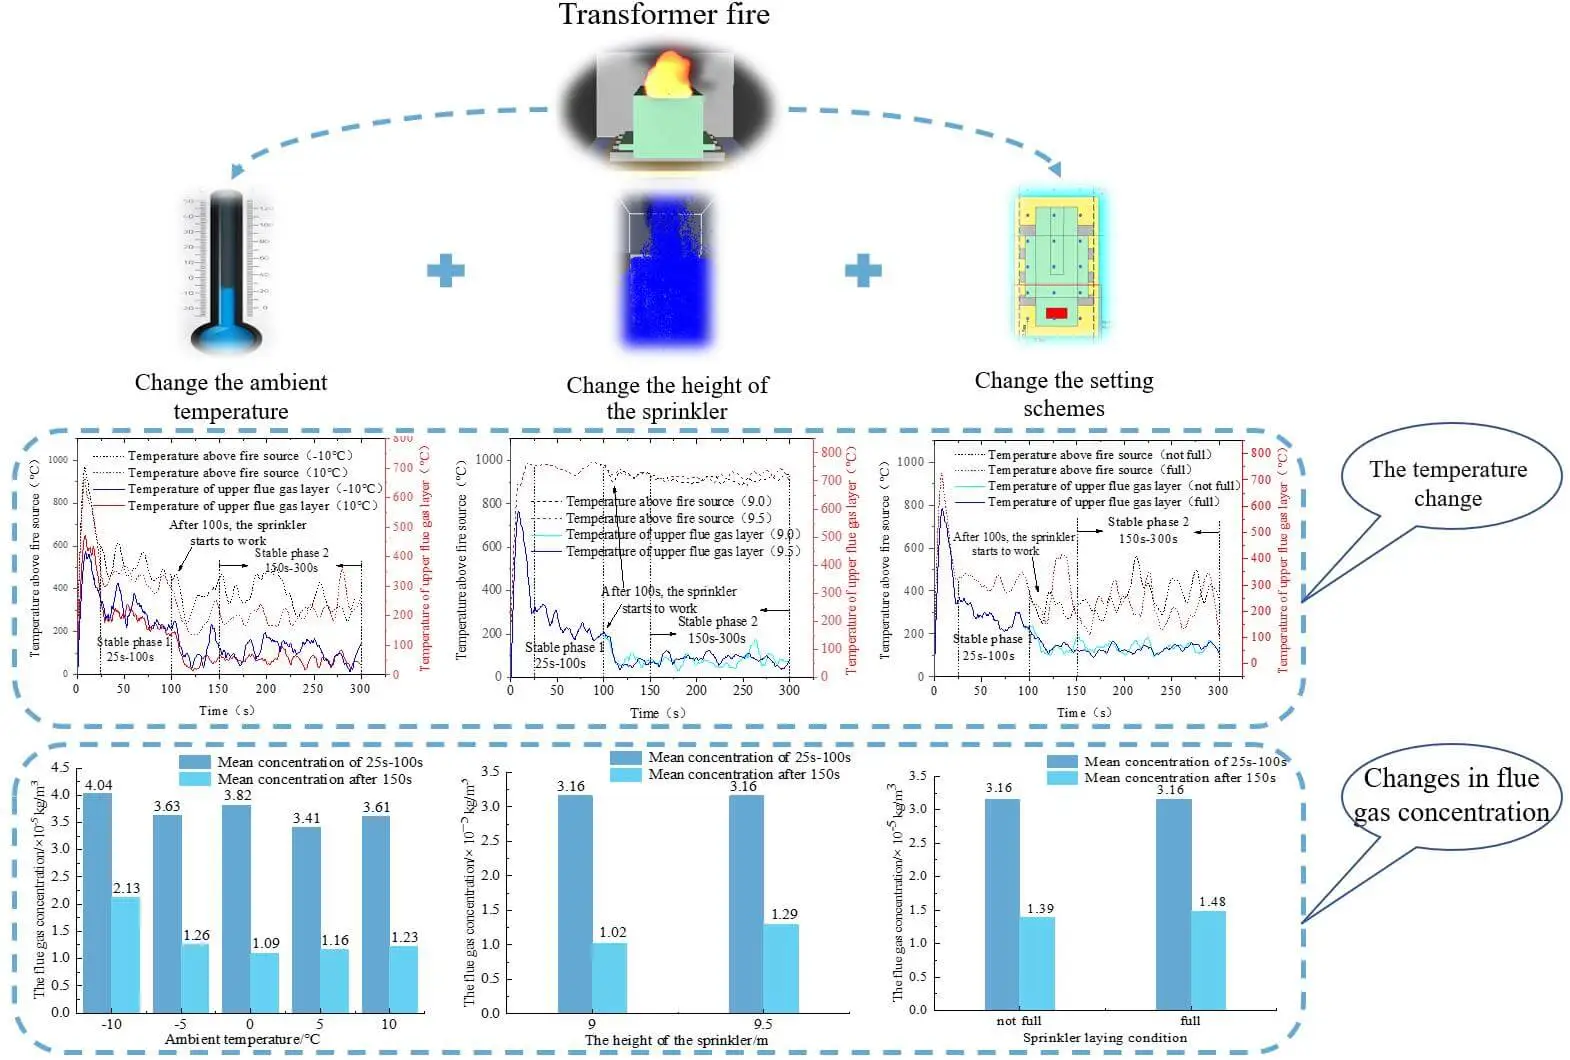 Numerical Simulation Analysis of the Transformer Fire Extinguishing Process with a High-Pressure Water Mist System under Different Conditions